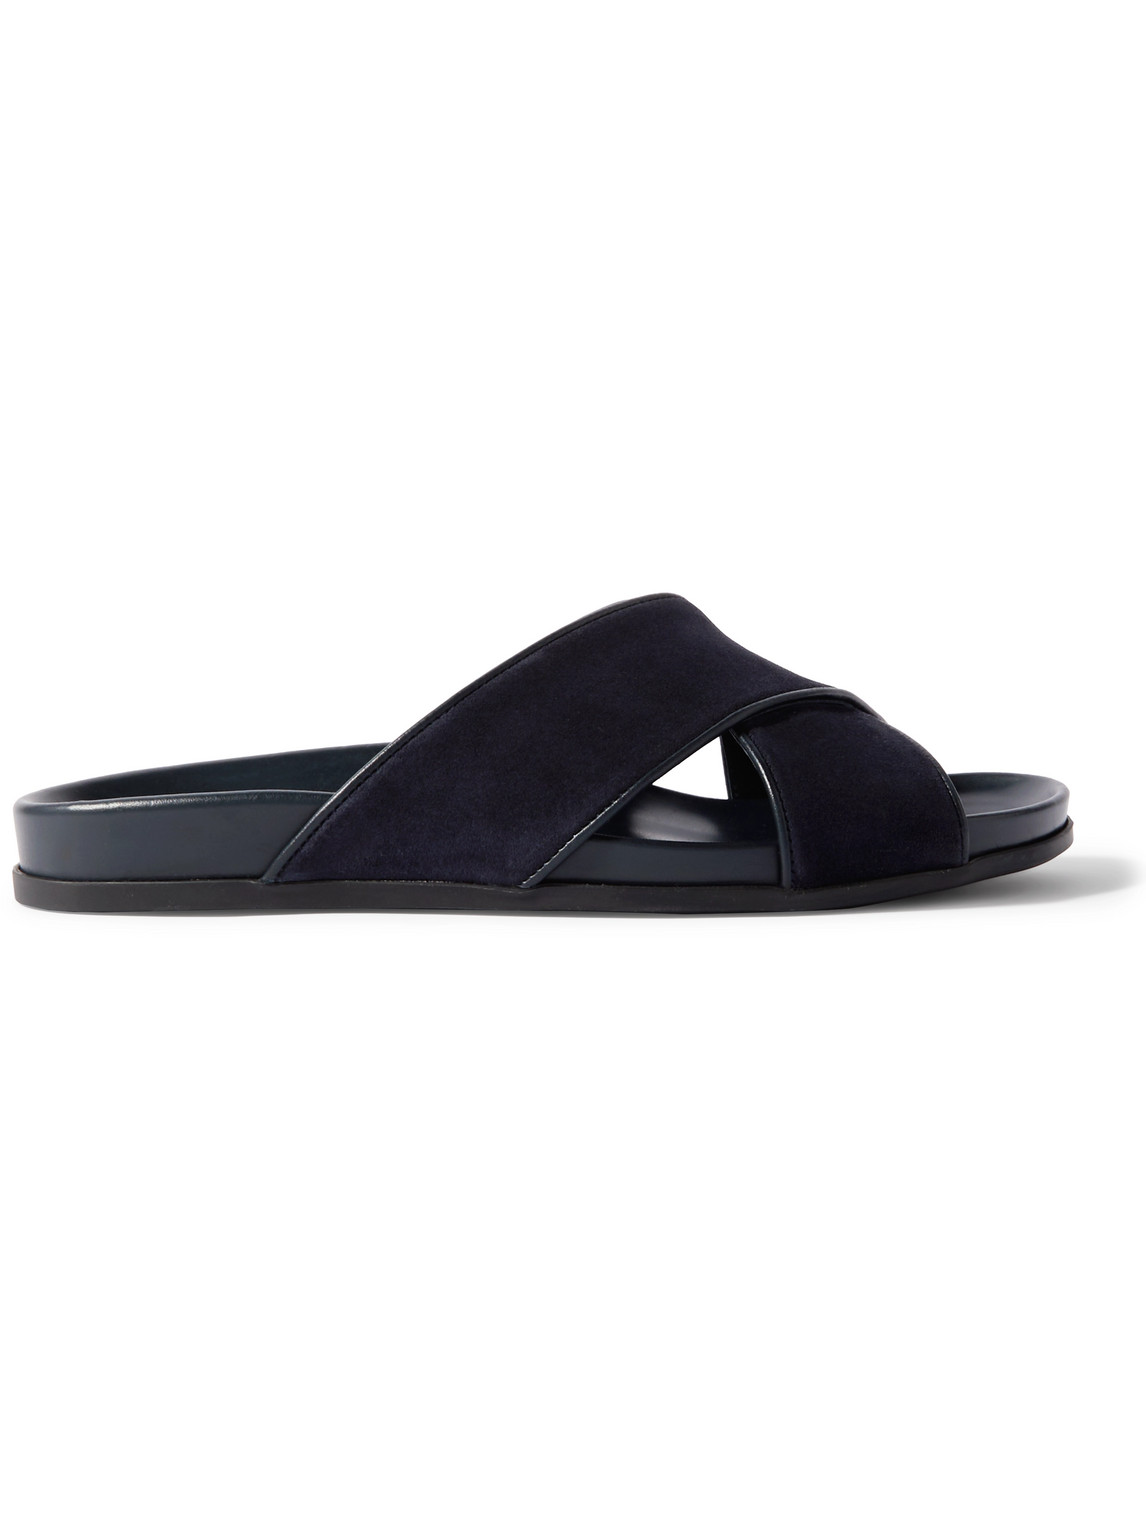 Chiltern Leather-Trimmed Suede Sandals